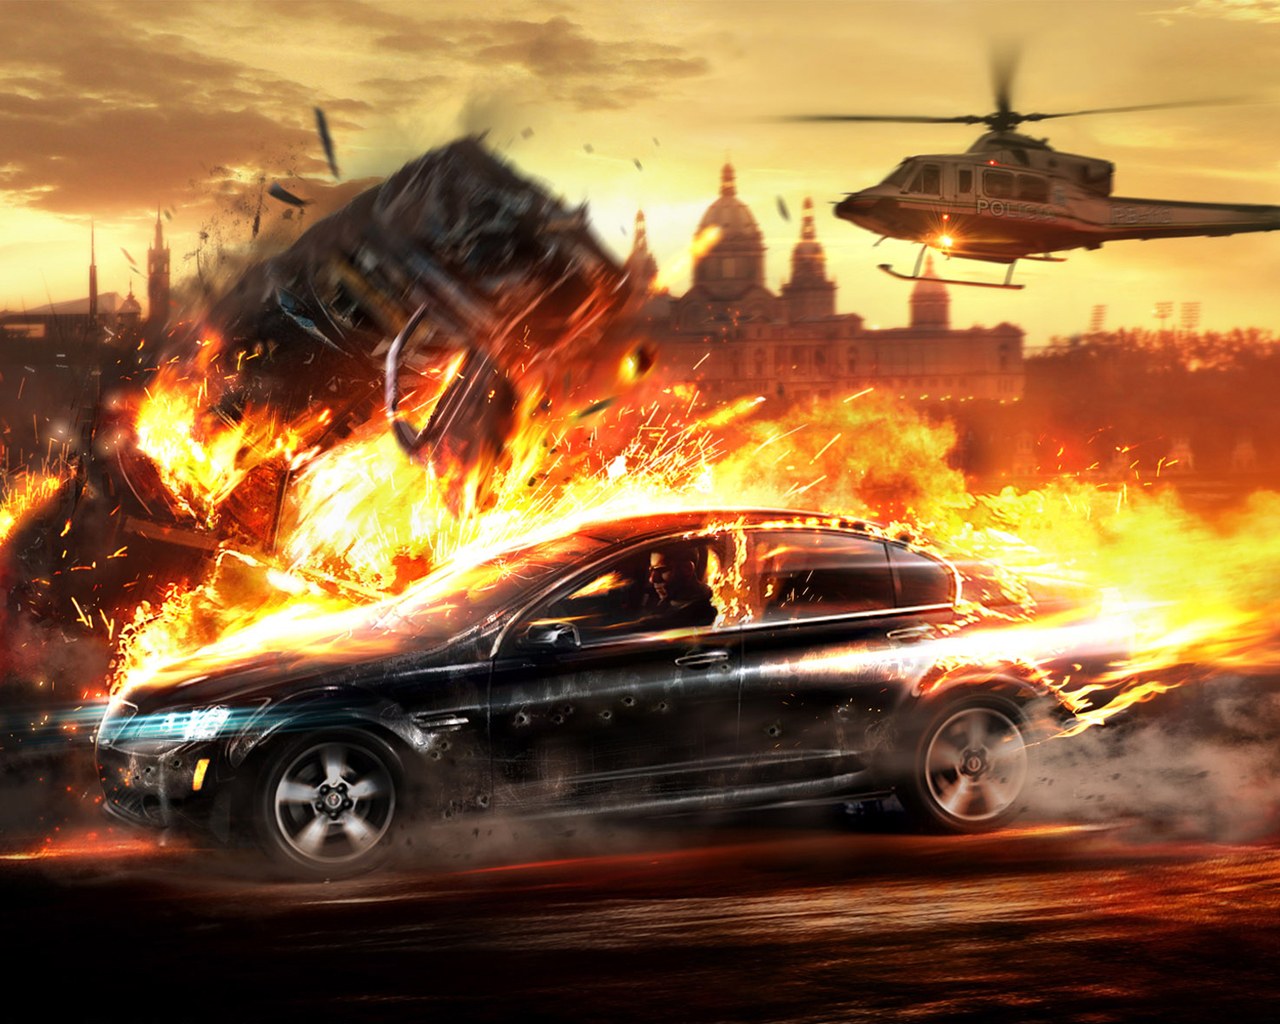 cool car wallpaper, explosion, vehicle, pc game, car, luxury vehicle, fire, personal luxury car, games, racing video game, landscape